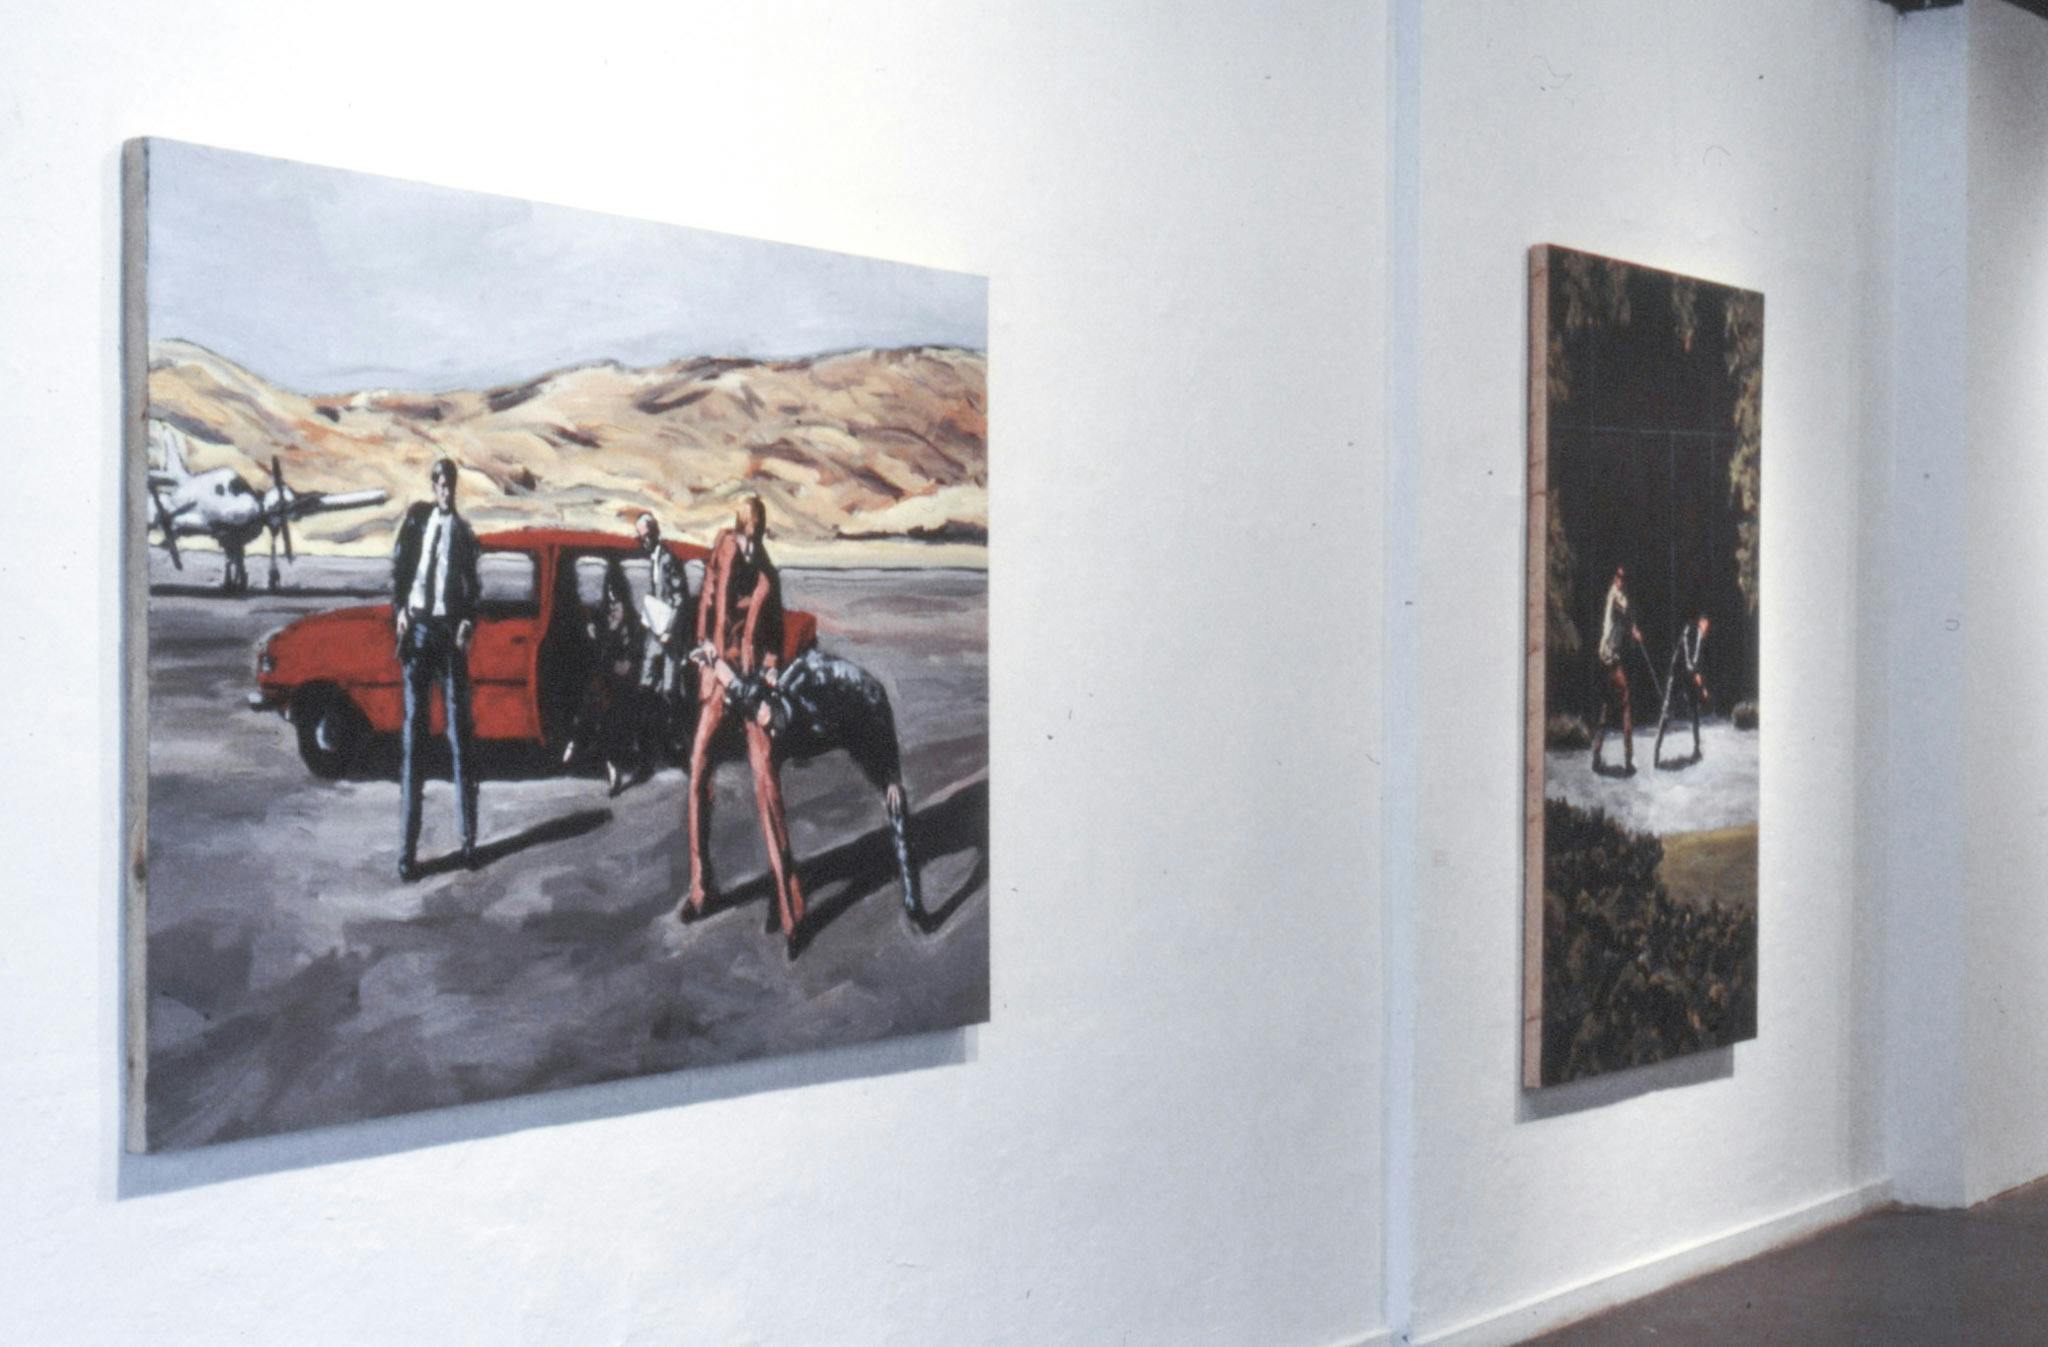 A closeup of 2 large paintings on a gallery wall, both showing different scenes. One shows 5 people in and around a red car on an airport landing strip. The other shows 2 people in a dark wooded area. 